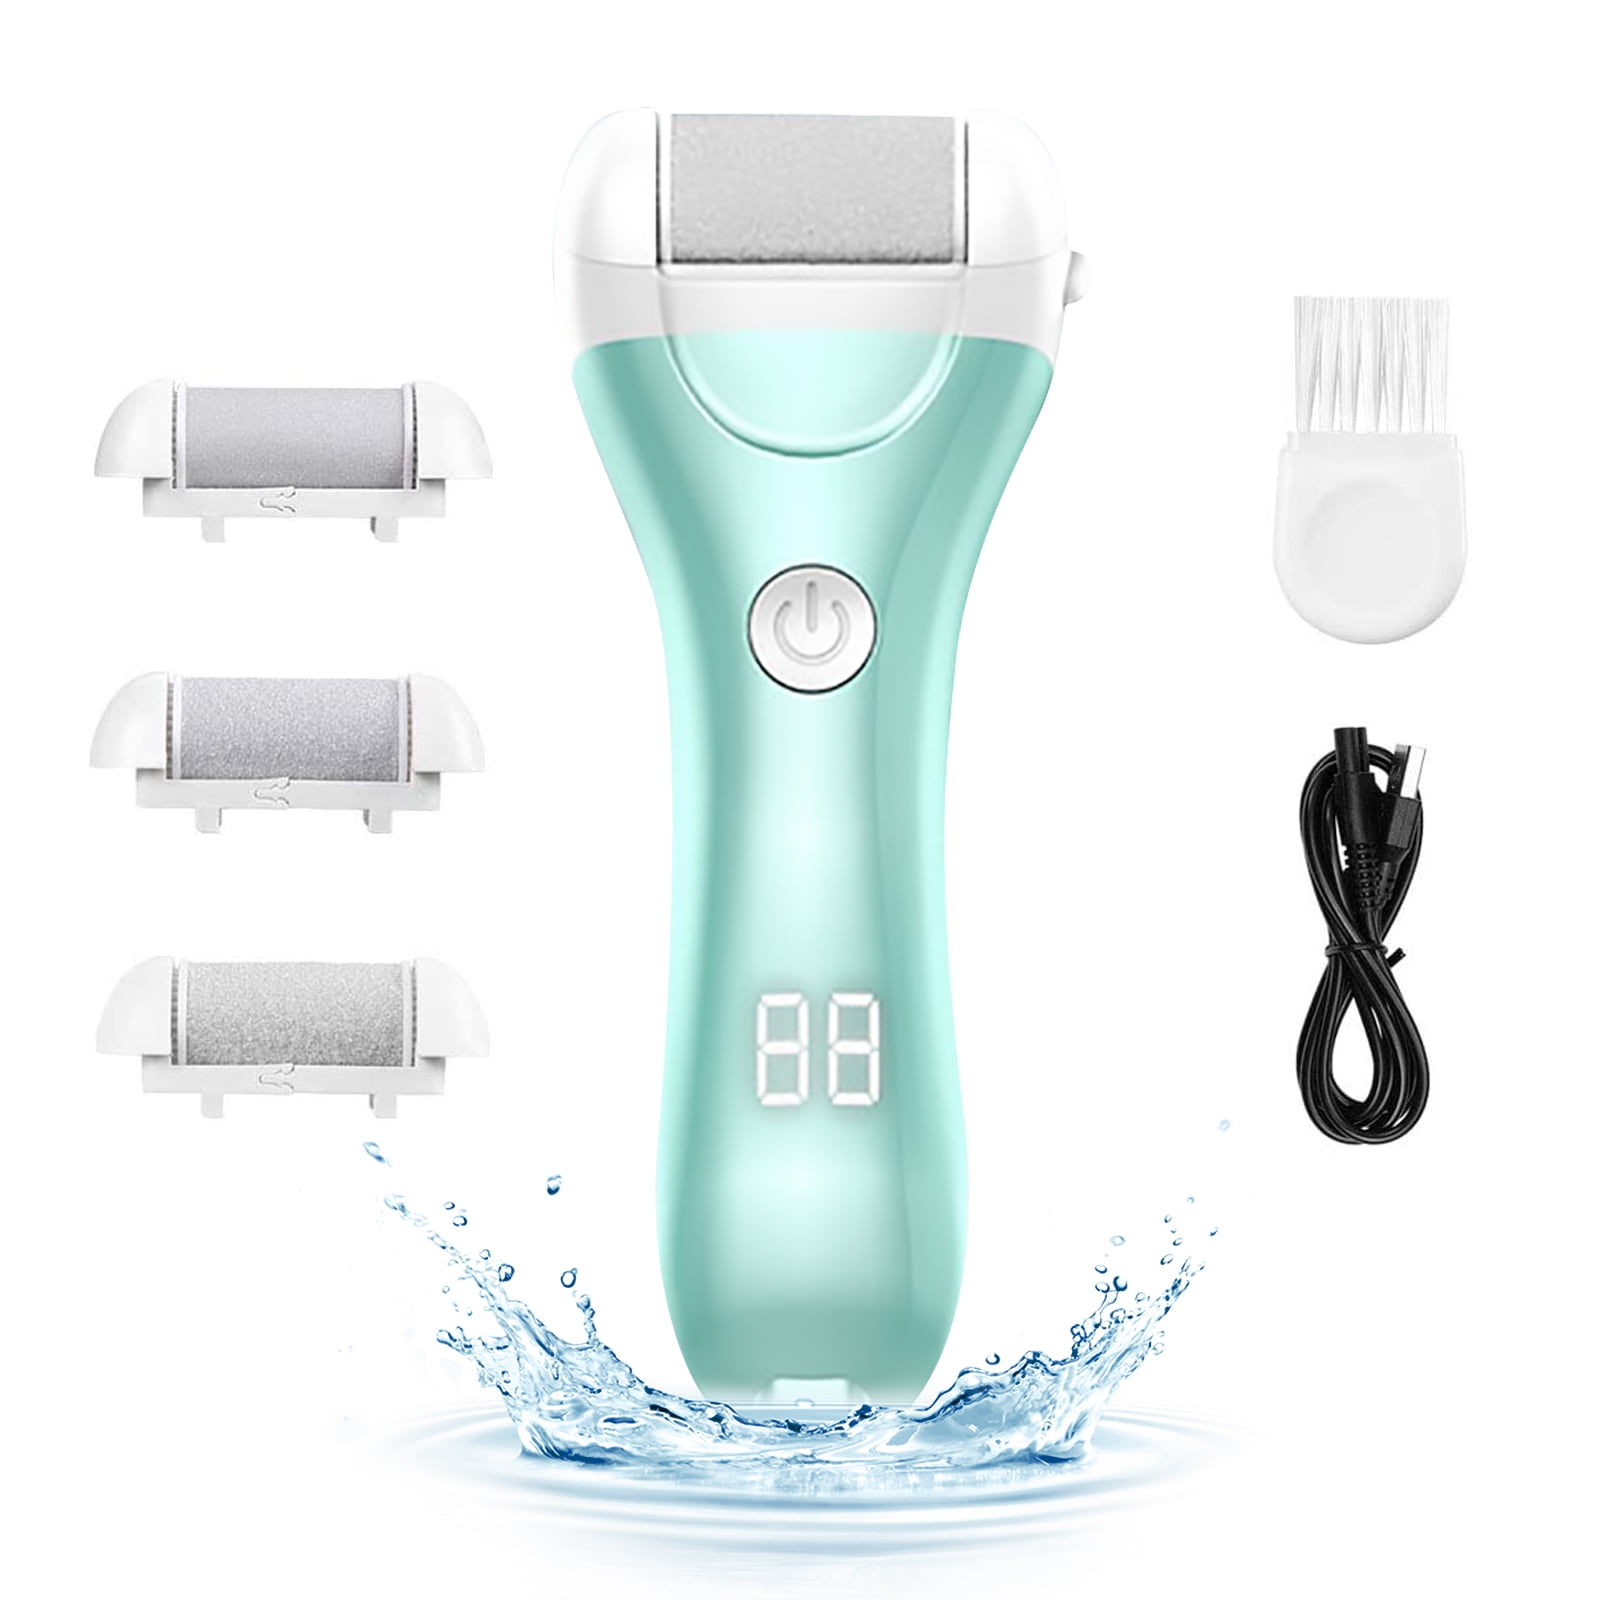 Wholesale lifewise rechargeable electric callus remover foot file scrubber  callus removal electronic foot file pedicure tools From m.